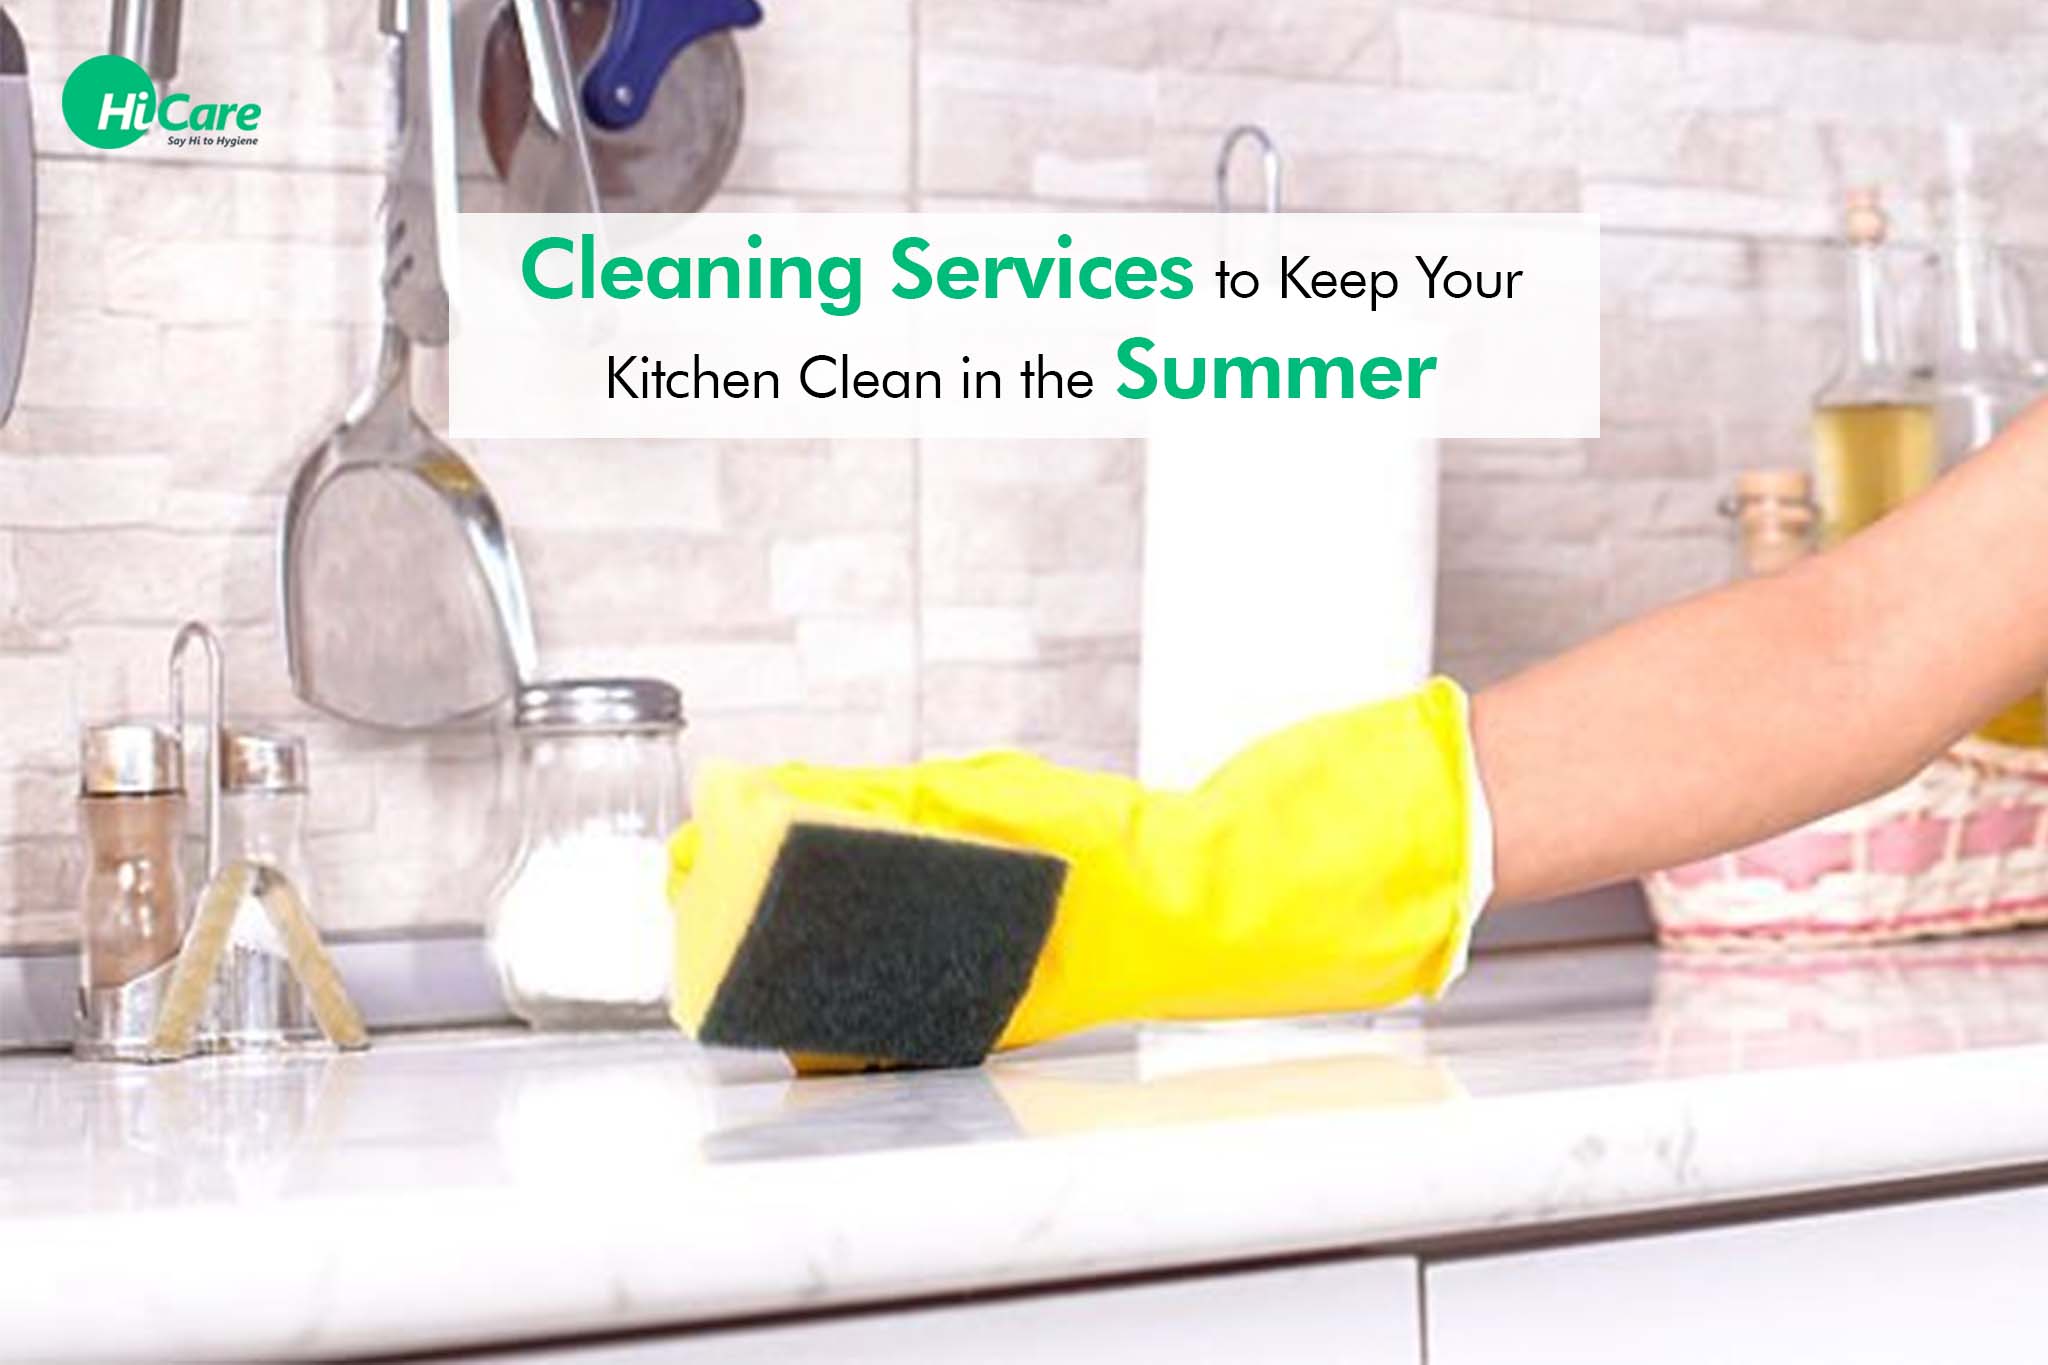 Cleaning Services to Keep Your Kitchen Clean in the Summer | HiCare